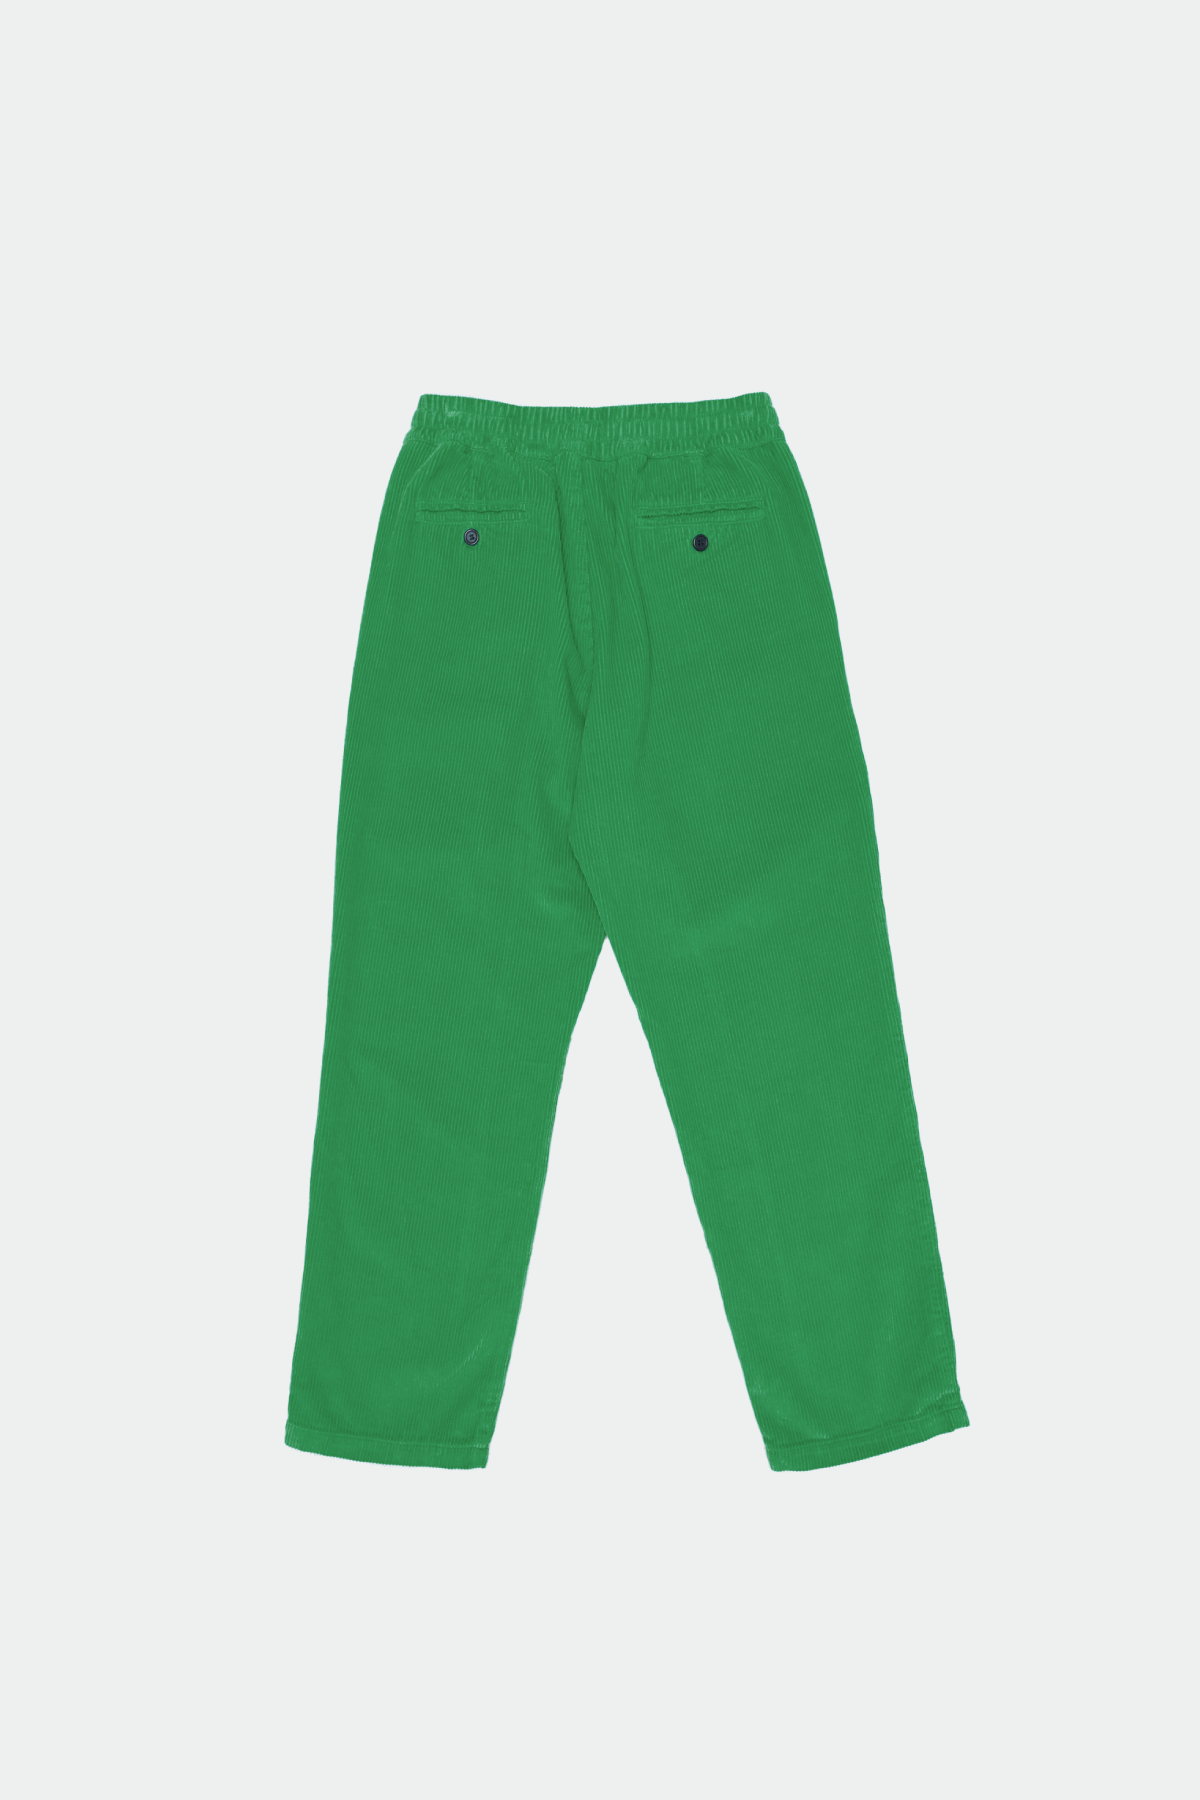 PANTS CORDS TURTLE GREEN